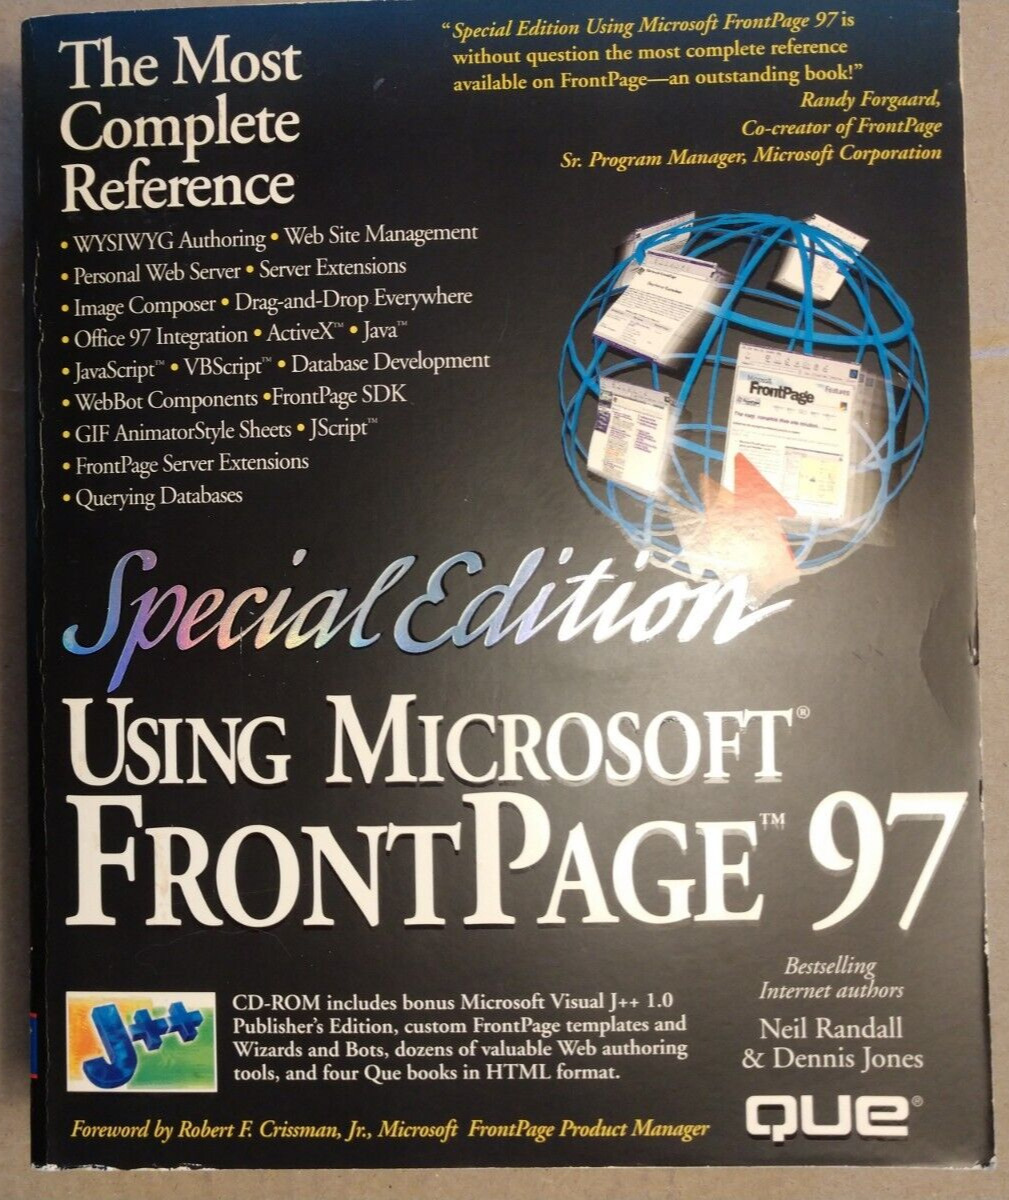 Using Microsoft FrontPage 97 Complete Reference Manual & CD-ROM